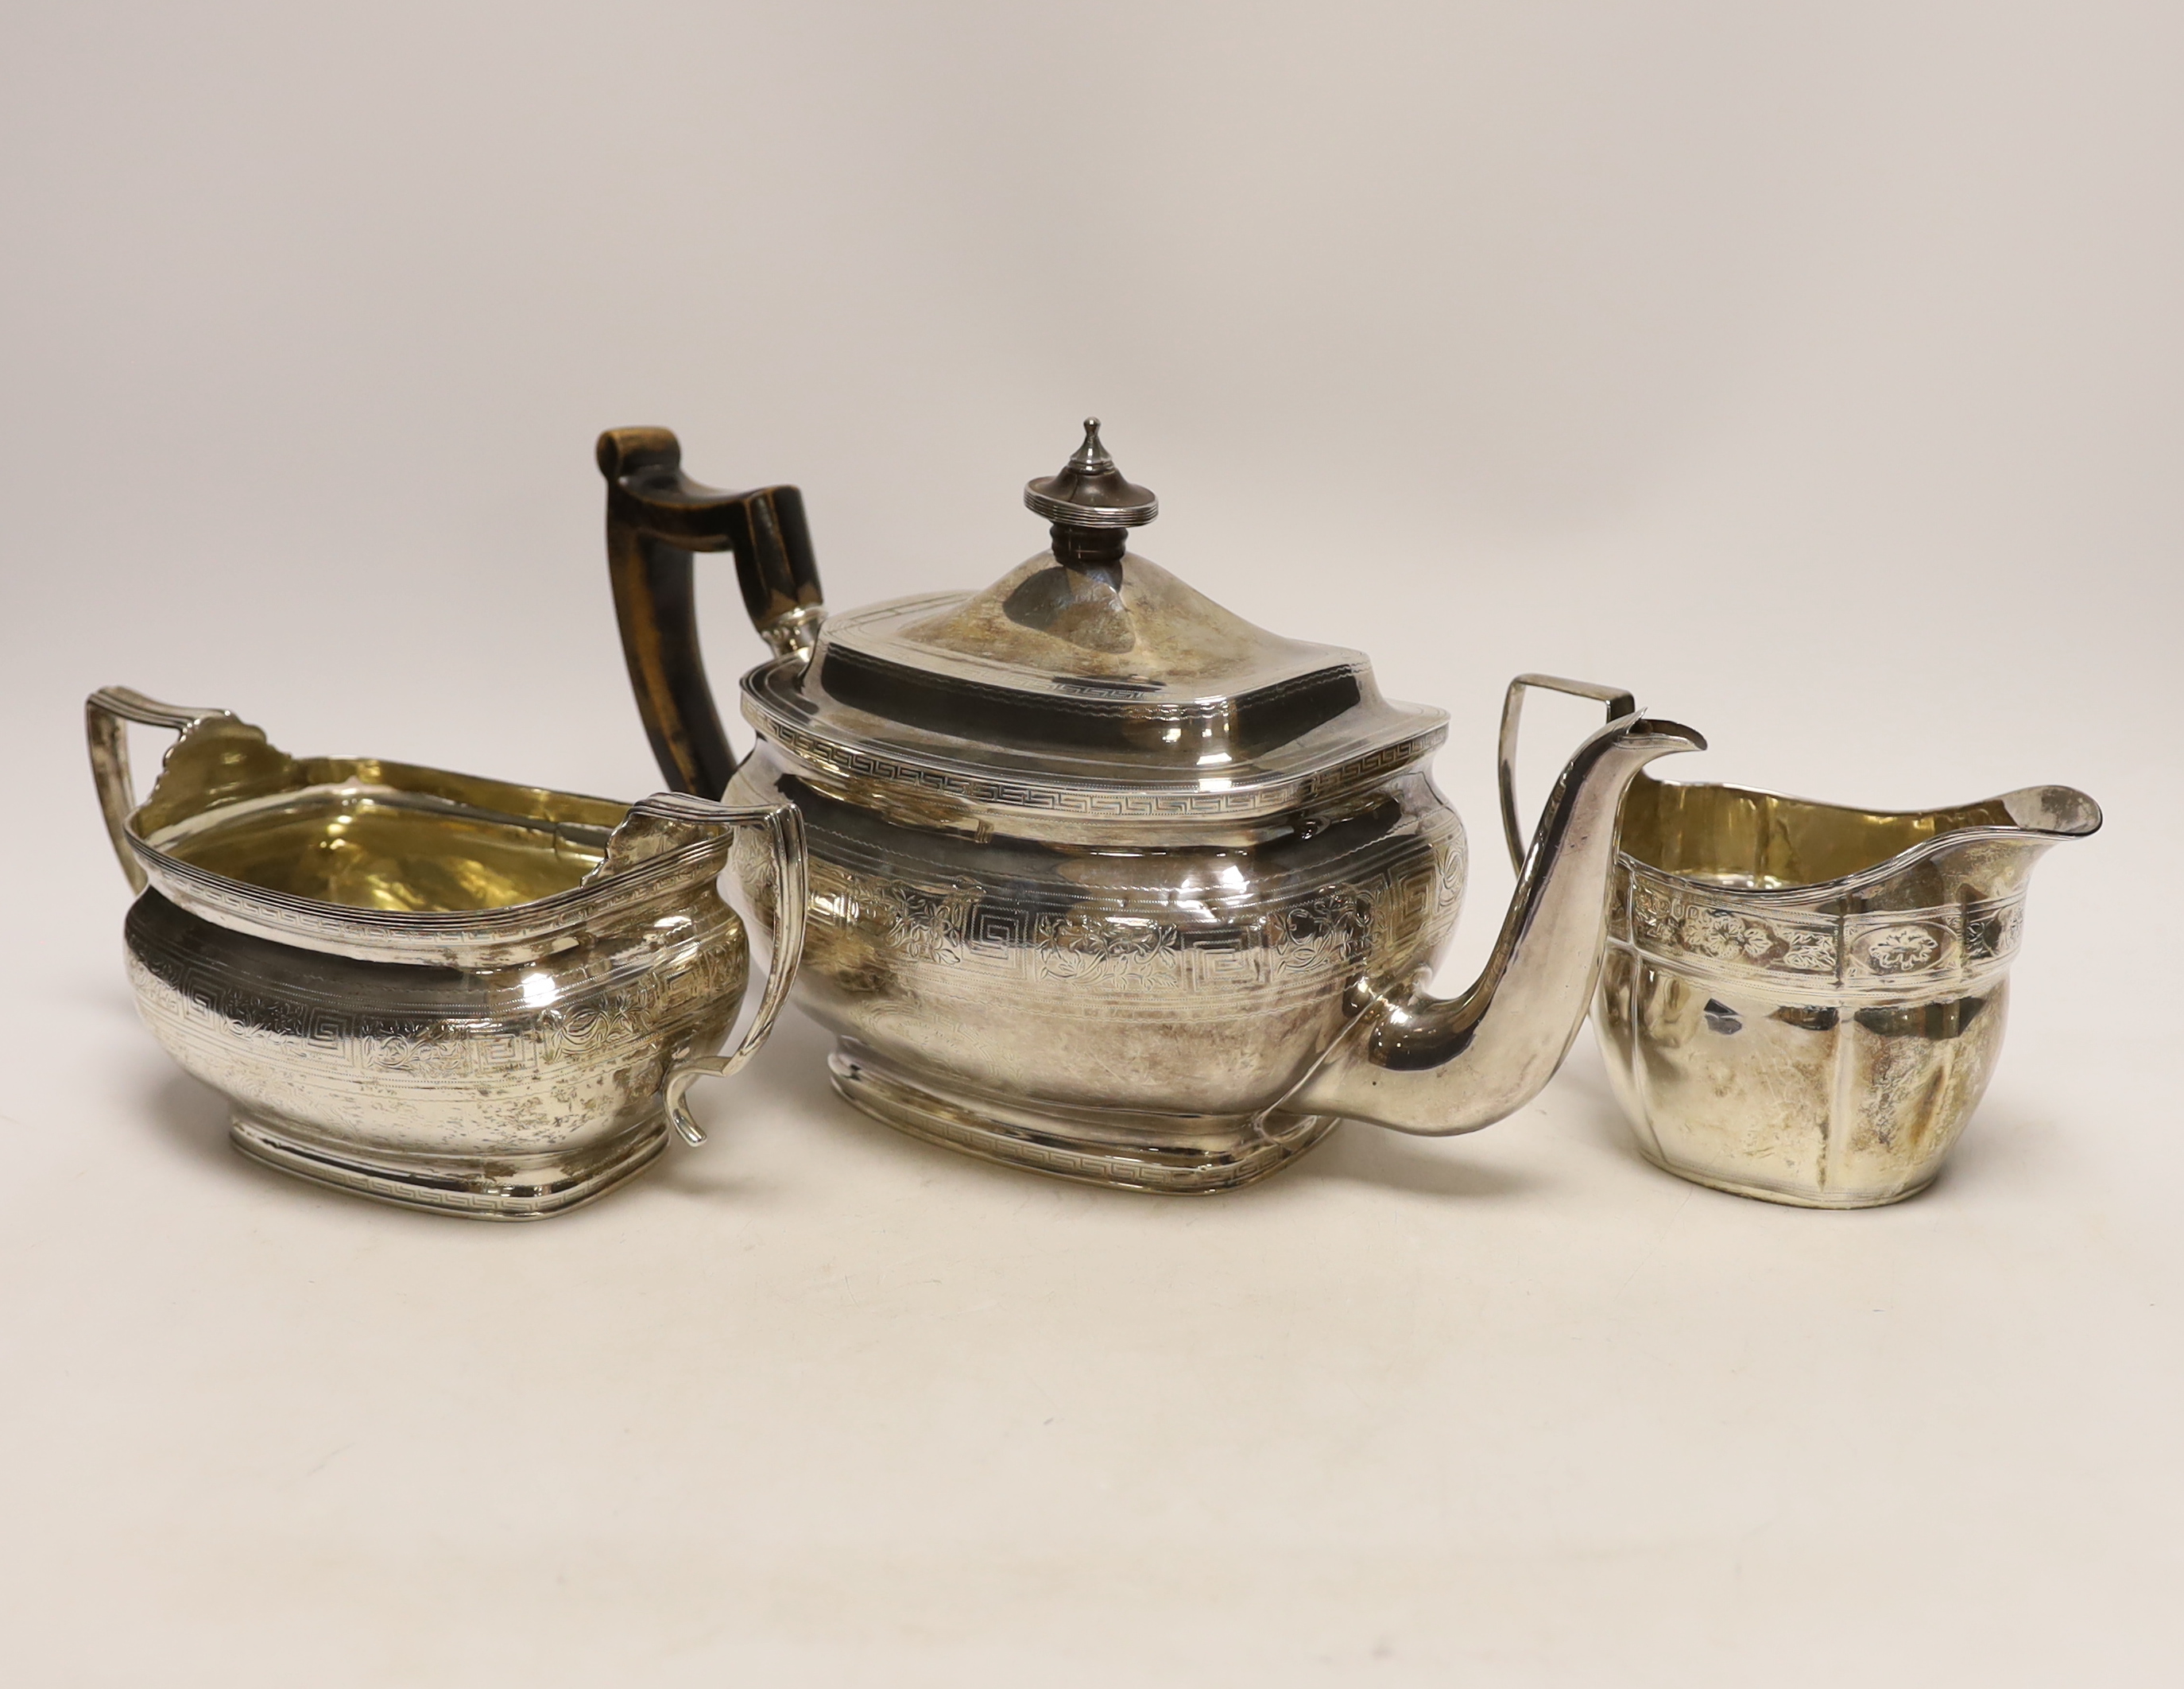 A George III engraved silver teapot and sugar bowl, by Andrew Fogelberg, London, 1805 and a similar matched silver cream jug, maker's mark rubbed, London, 1806